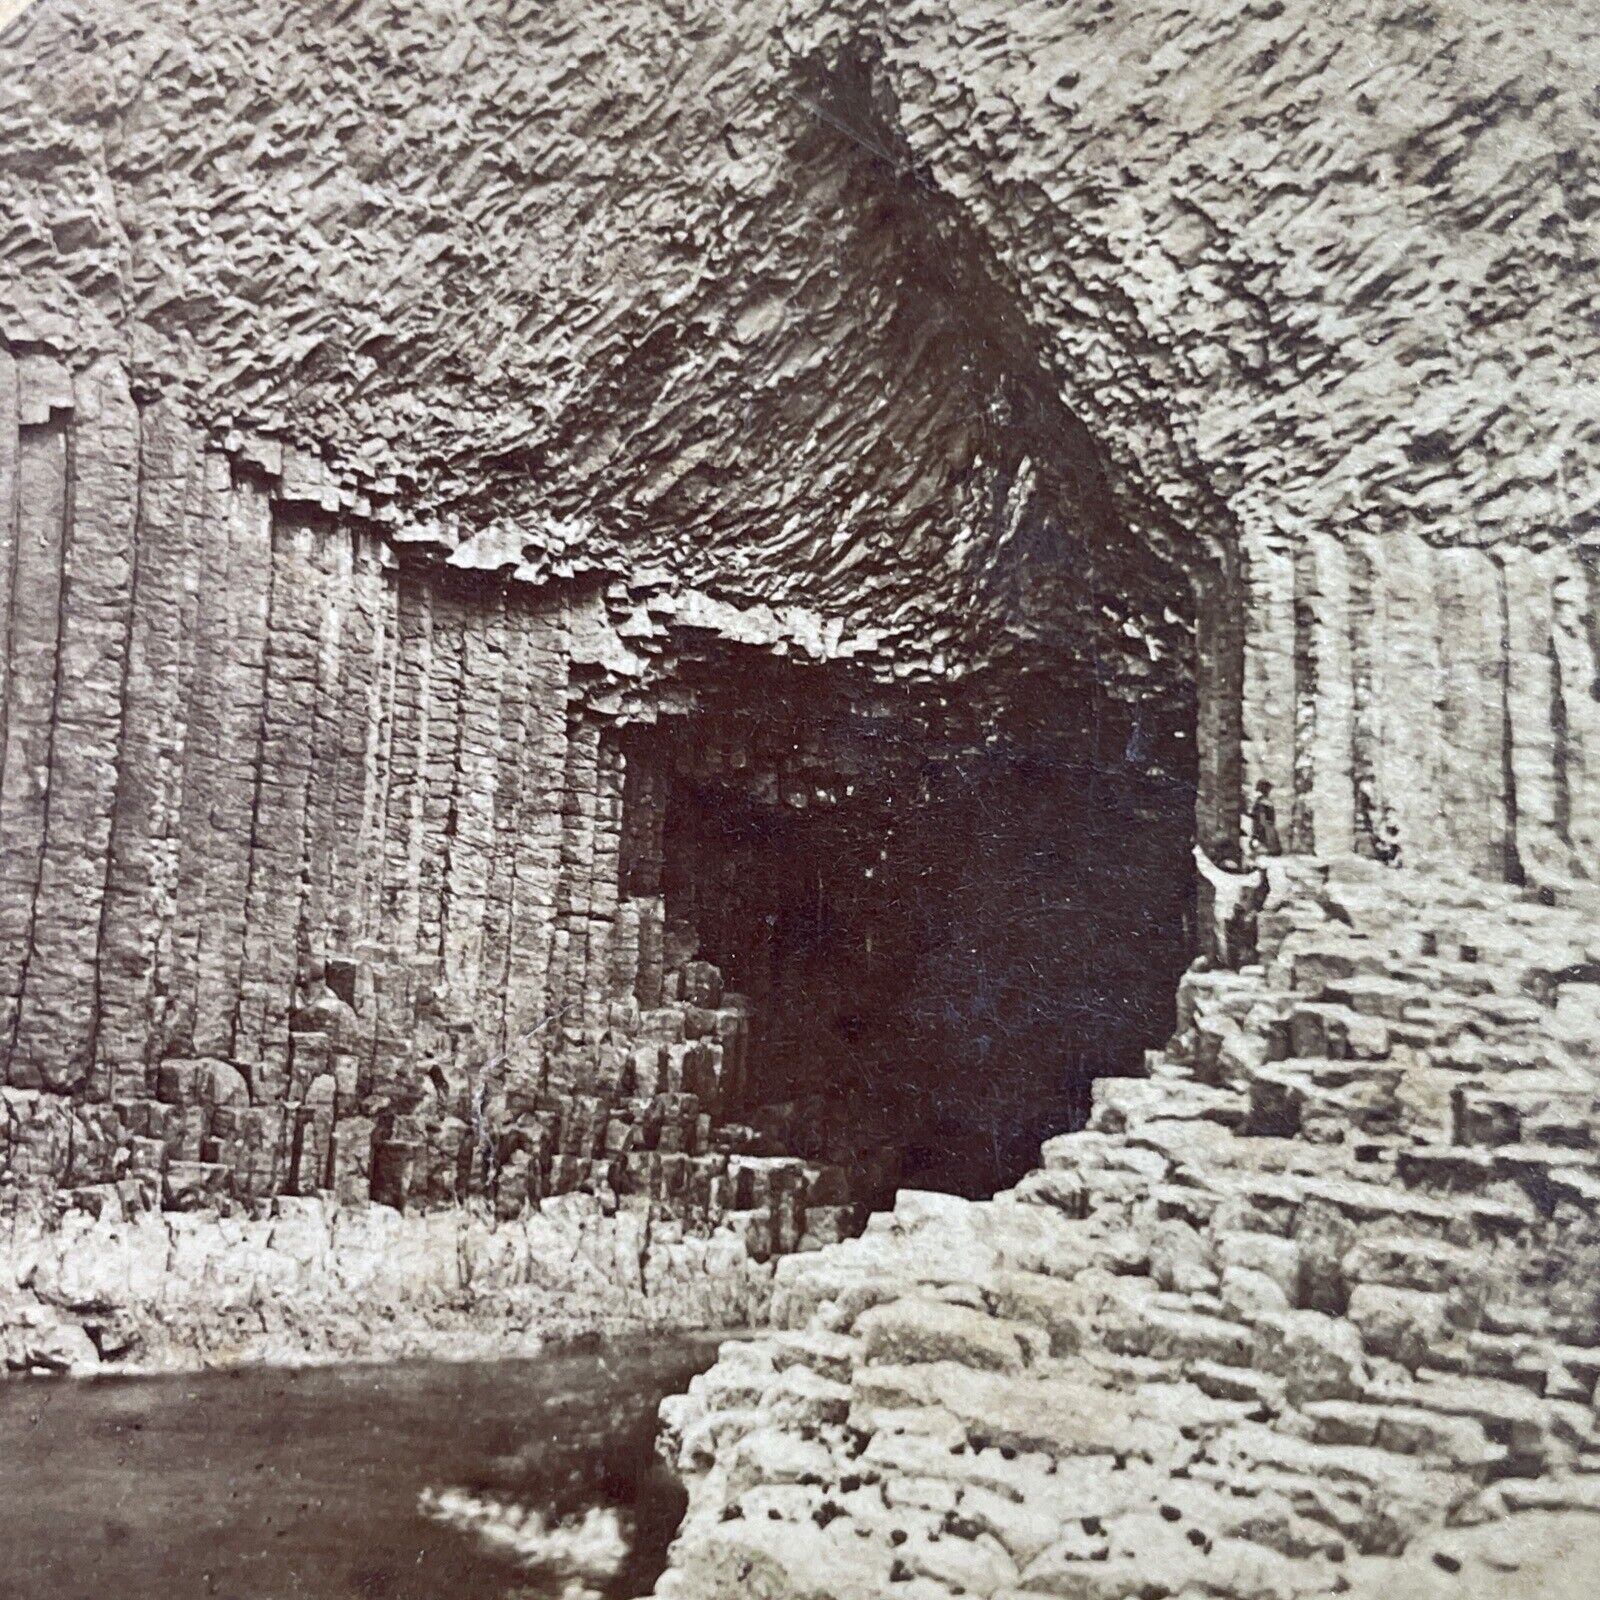 Antique 1880s Fingals Cave Staffa England North Sea Stereoview Photo Card P3368